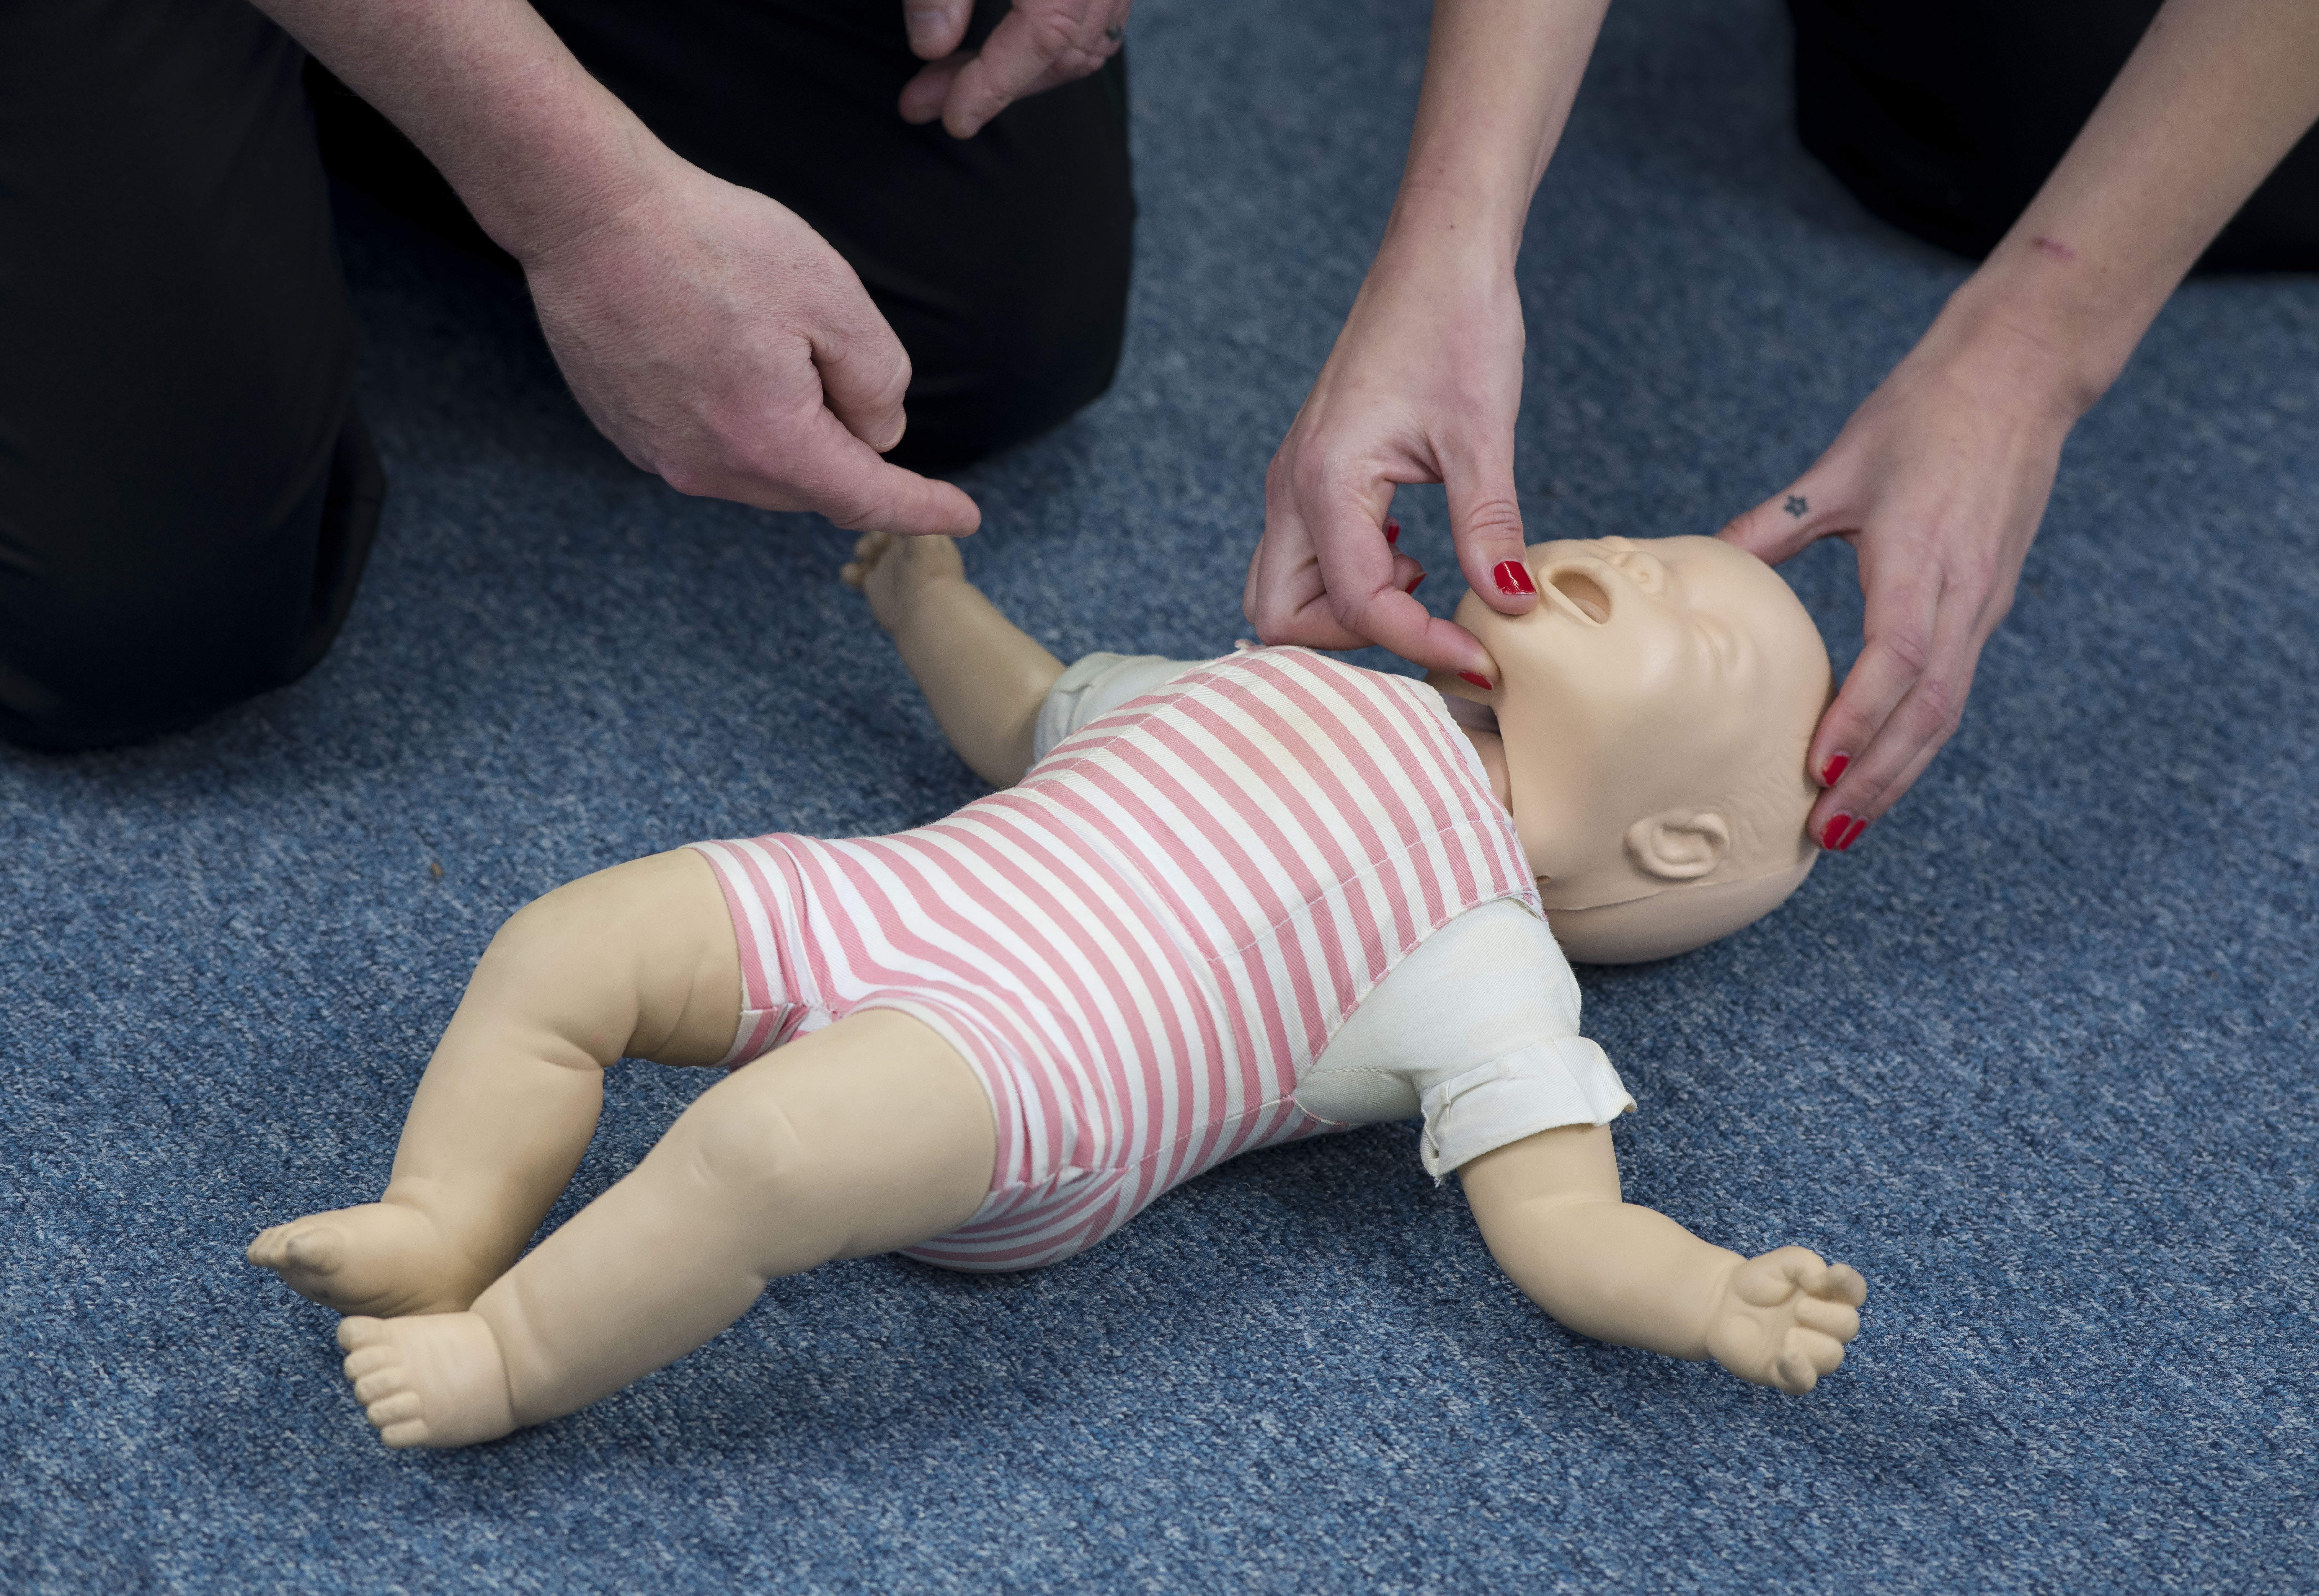 practicing cpr on a baby as part of paediatric first aid